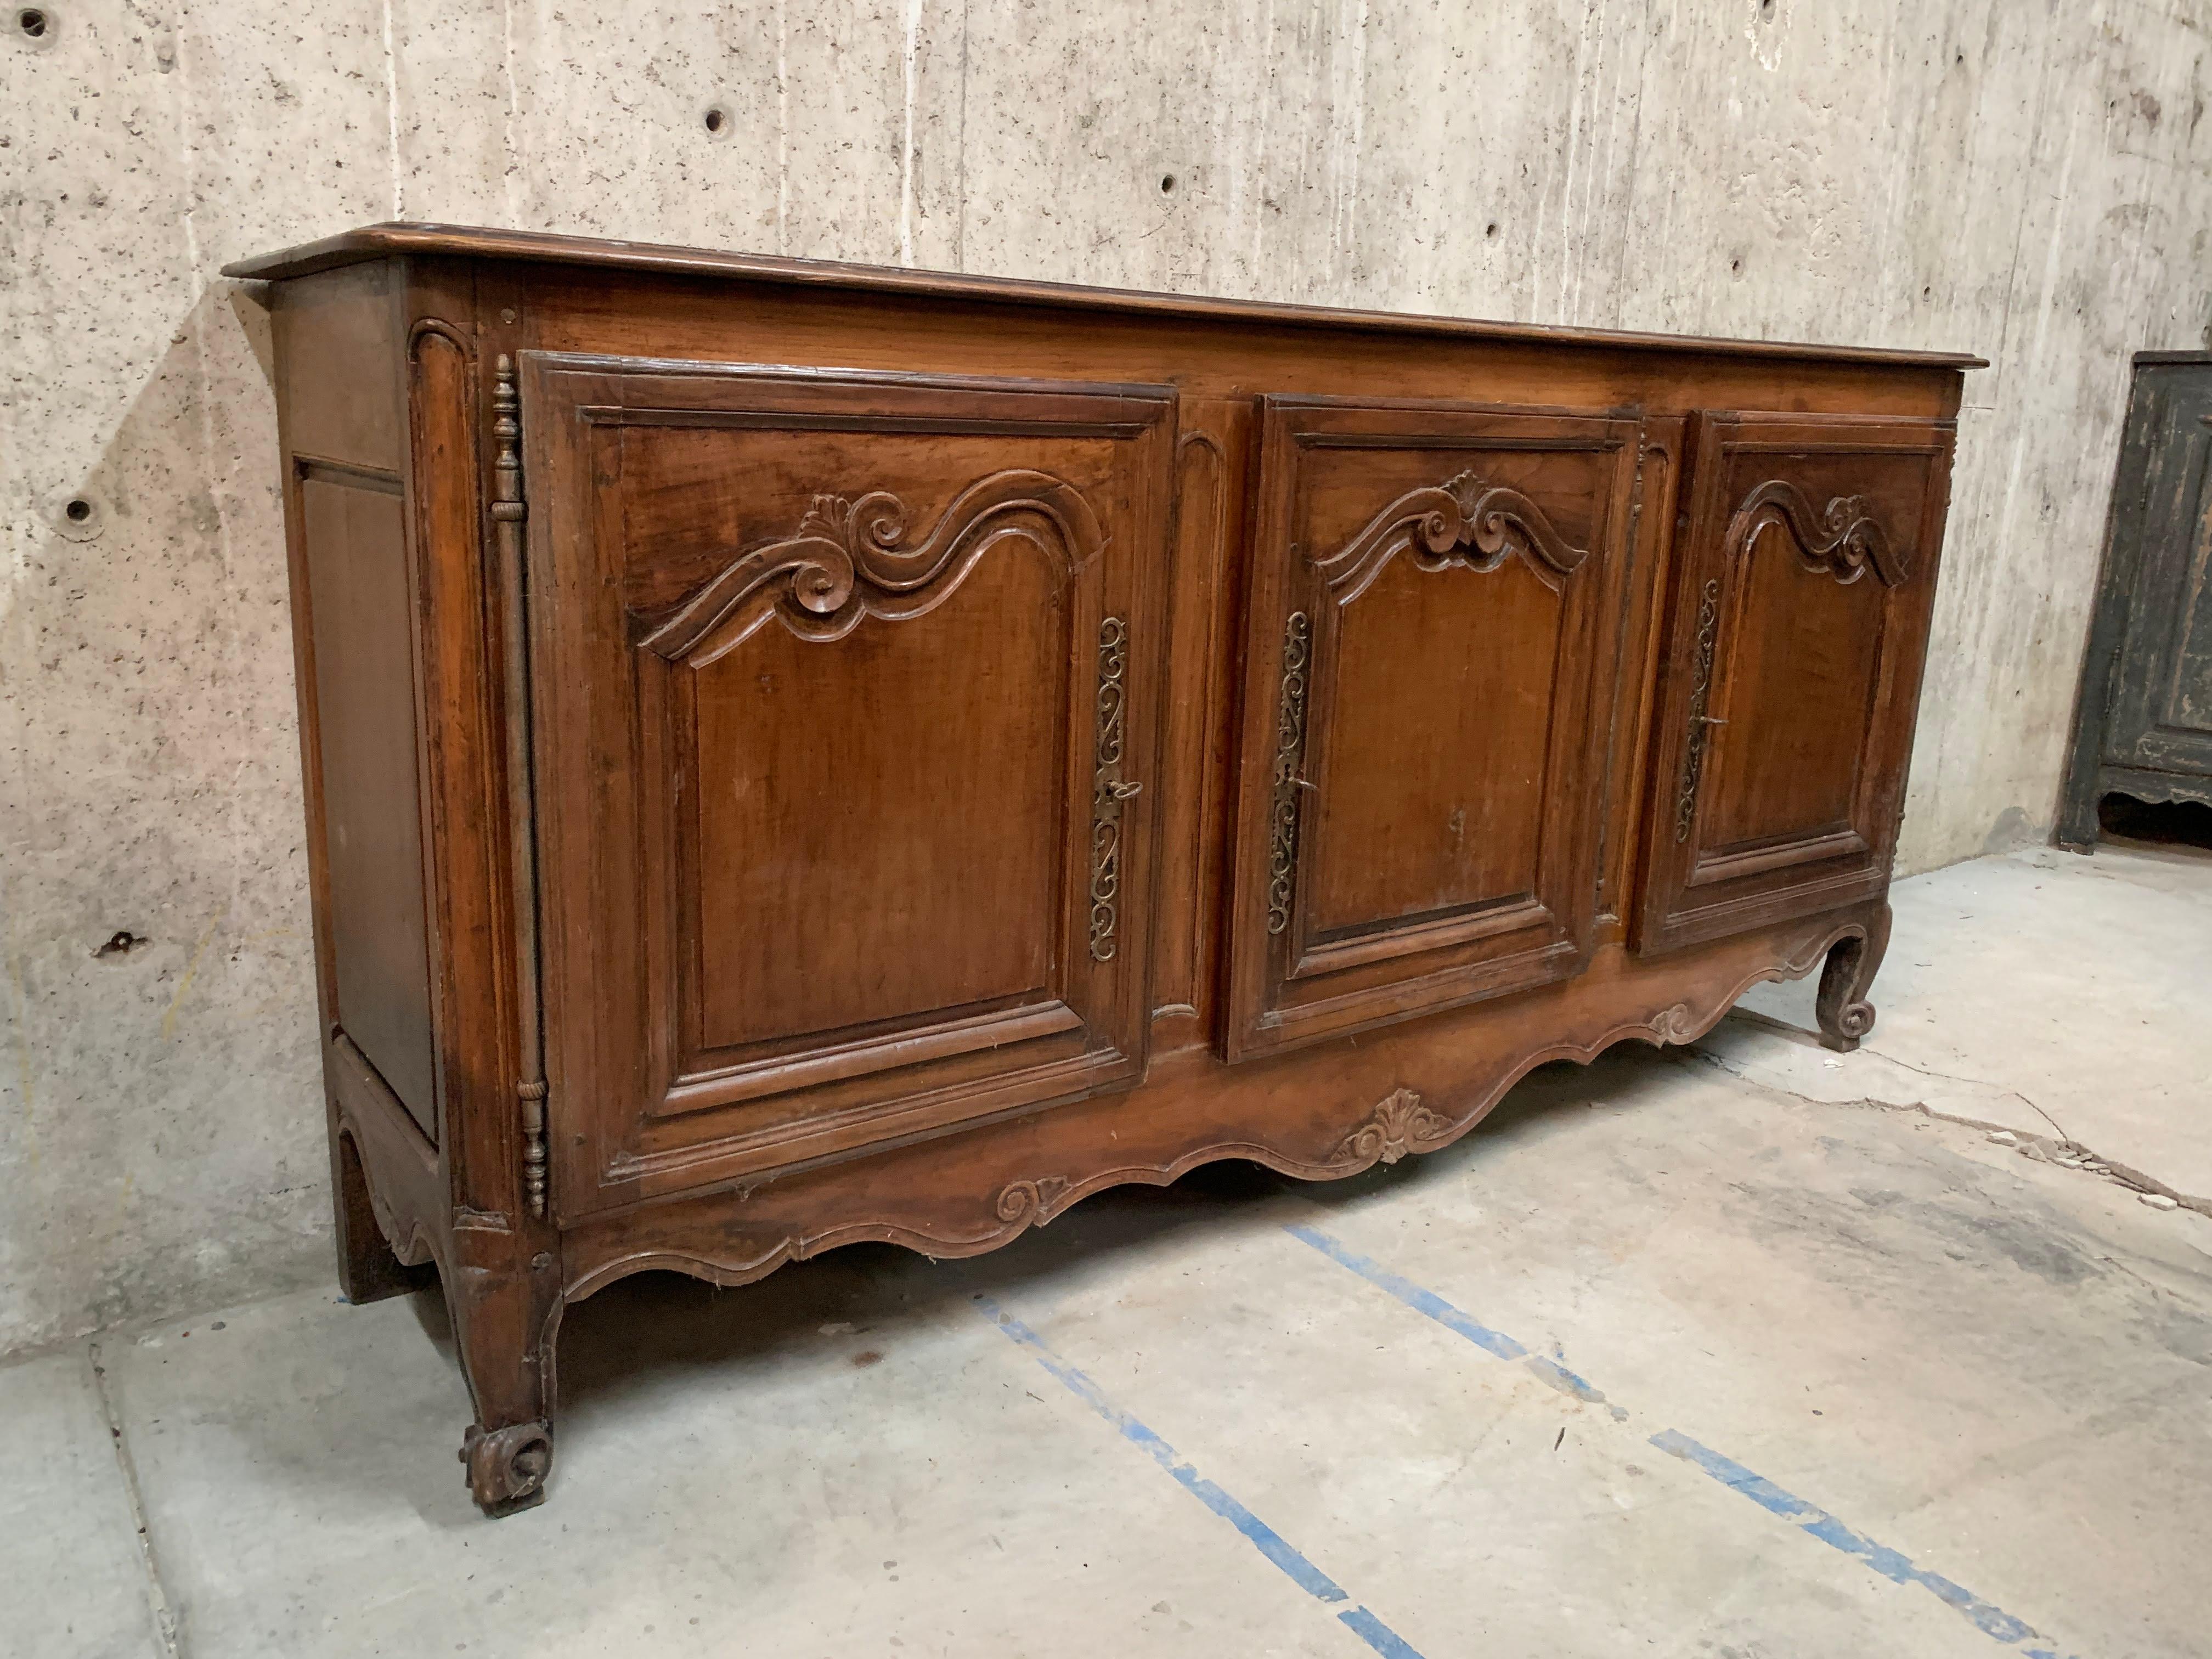 Antique French Long Three Door Carved Fruitwood Sideboard Buffet In Good Condition For Sale In Sheridan, CO